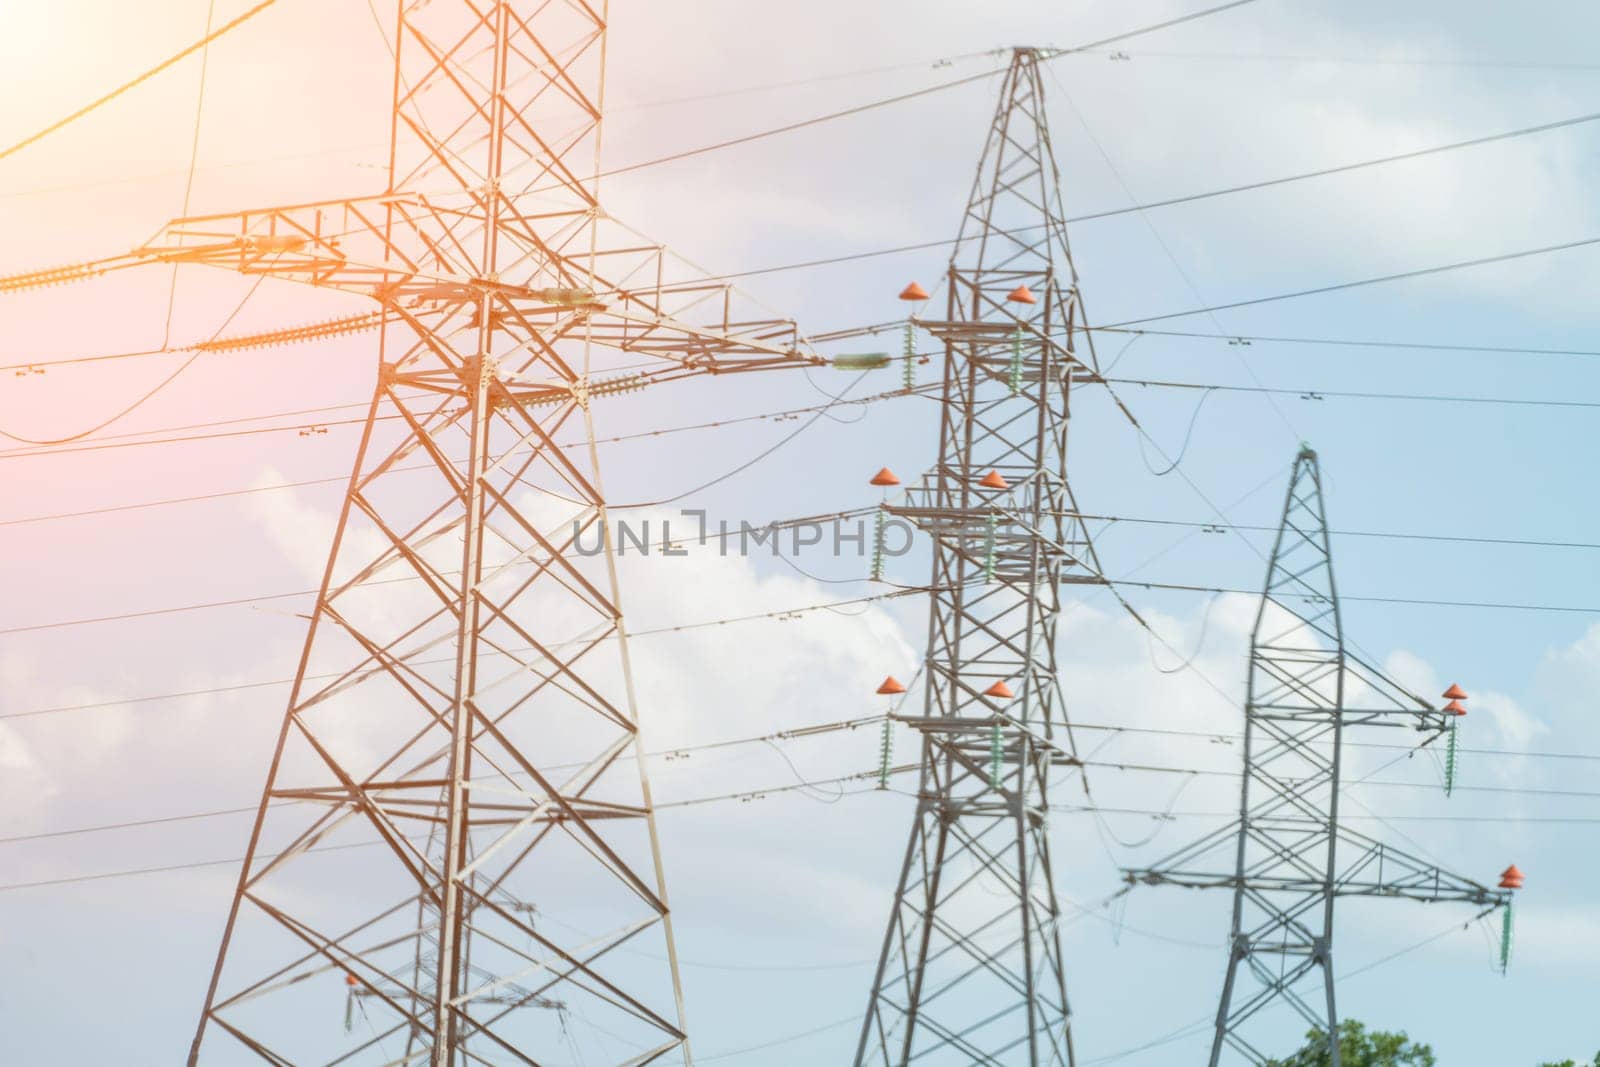 High voltage towers with sky background. Power line support with wires for electricity transmission. High voltage grid tower with wire cable at distribution station. Energy industry, energy saving.